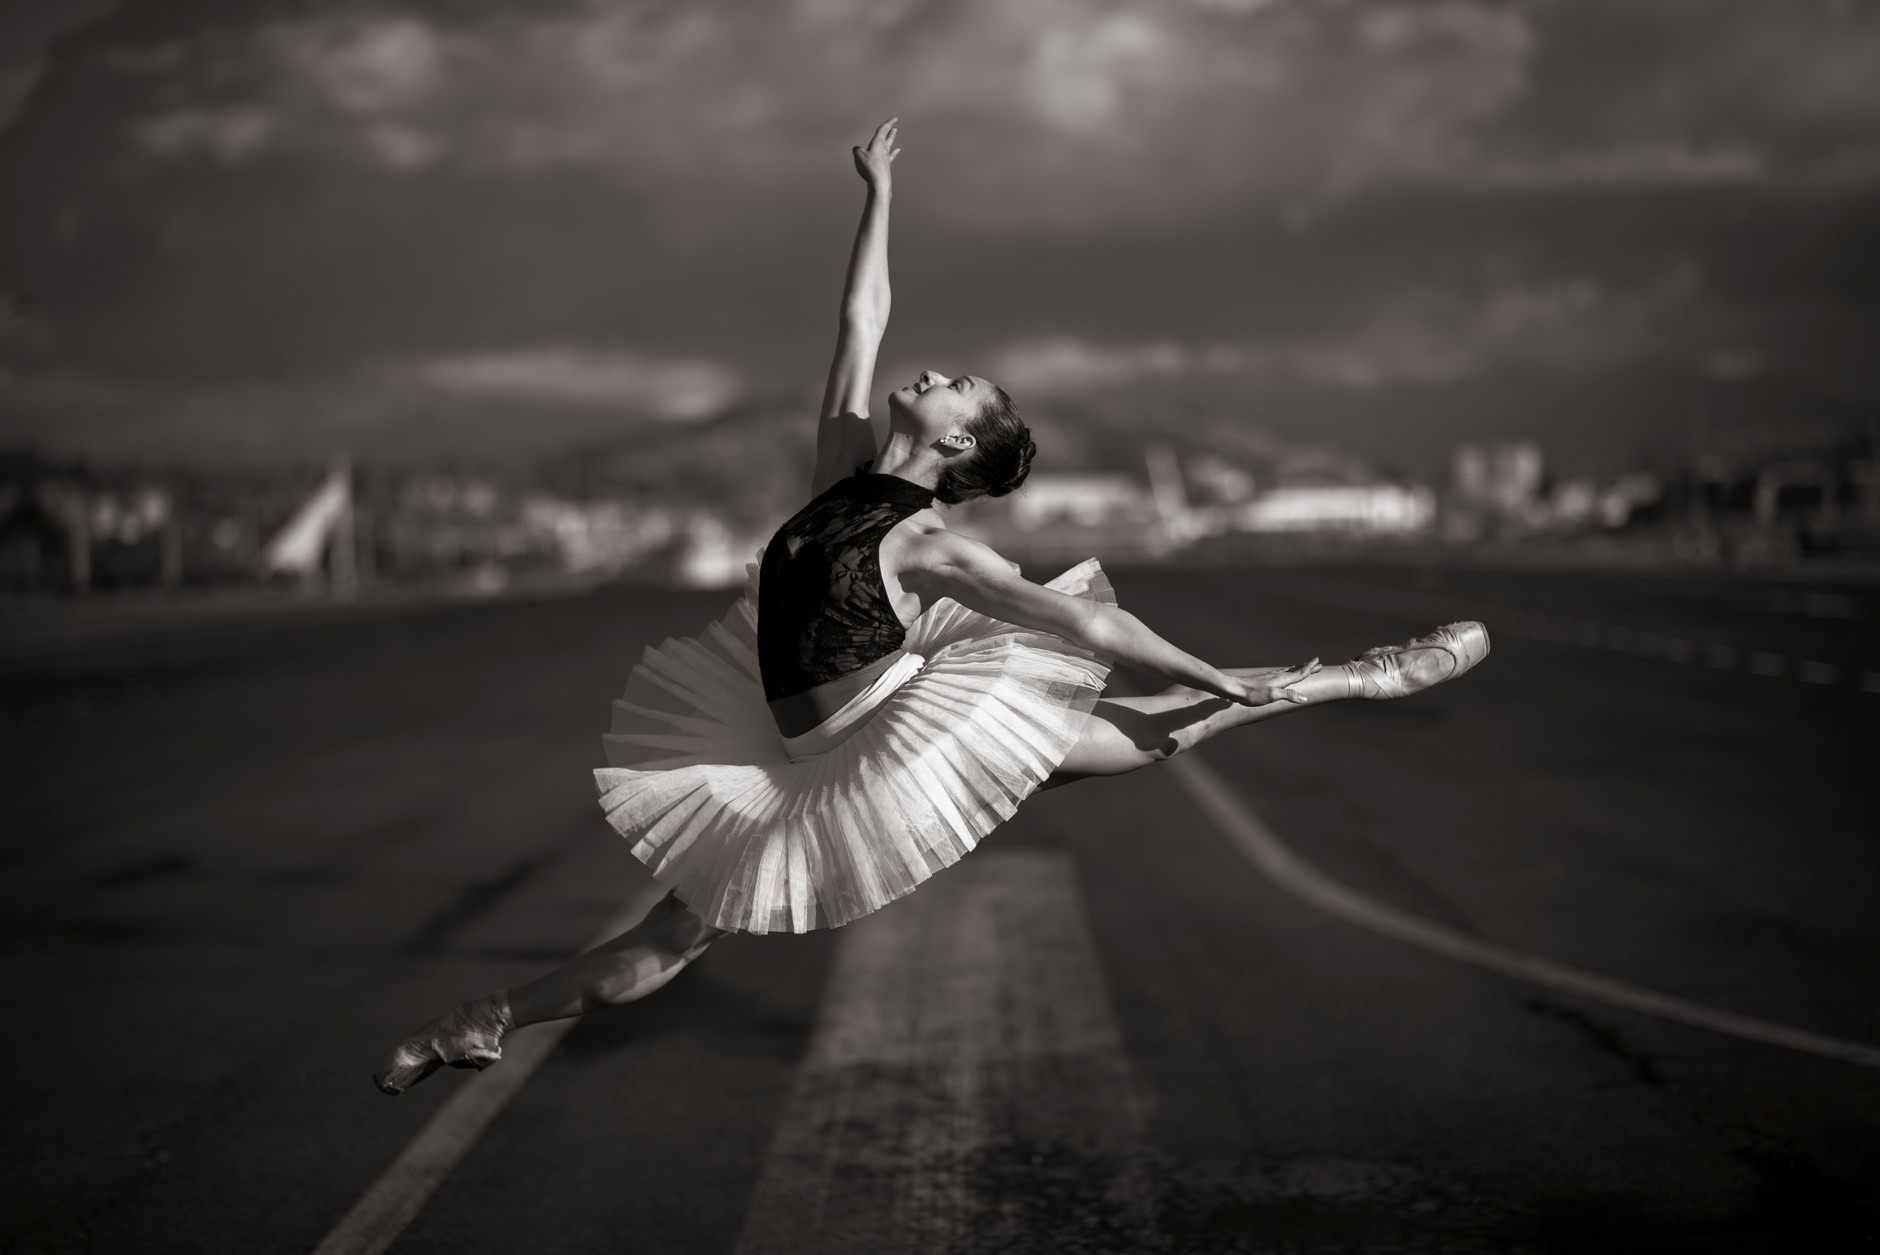 Ballet dancer leaping in the air.